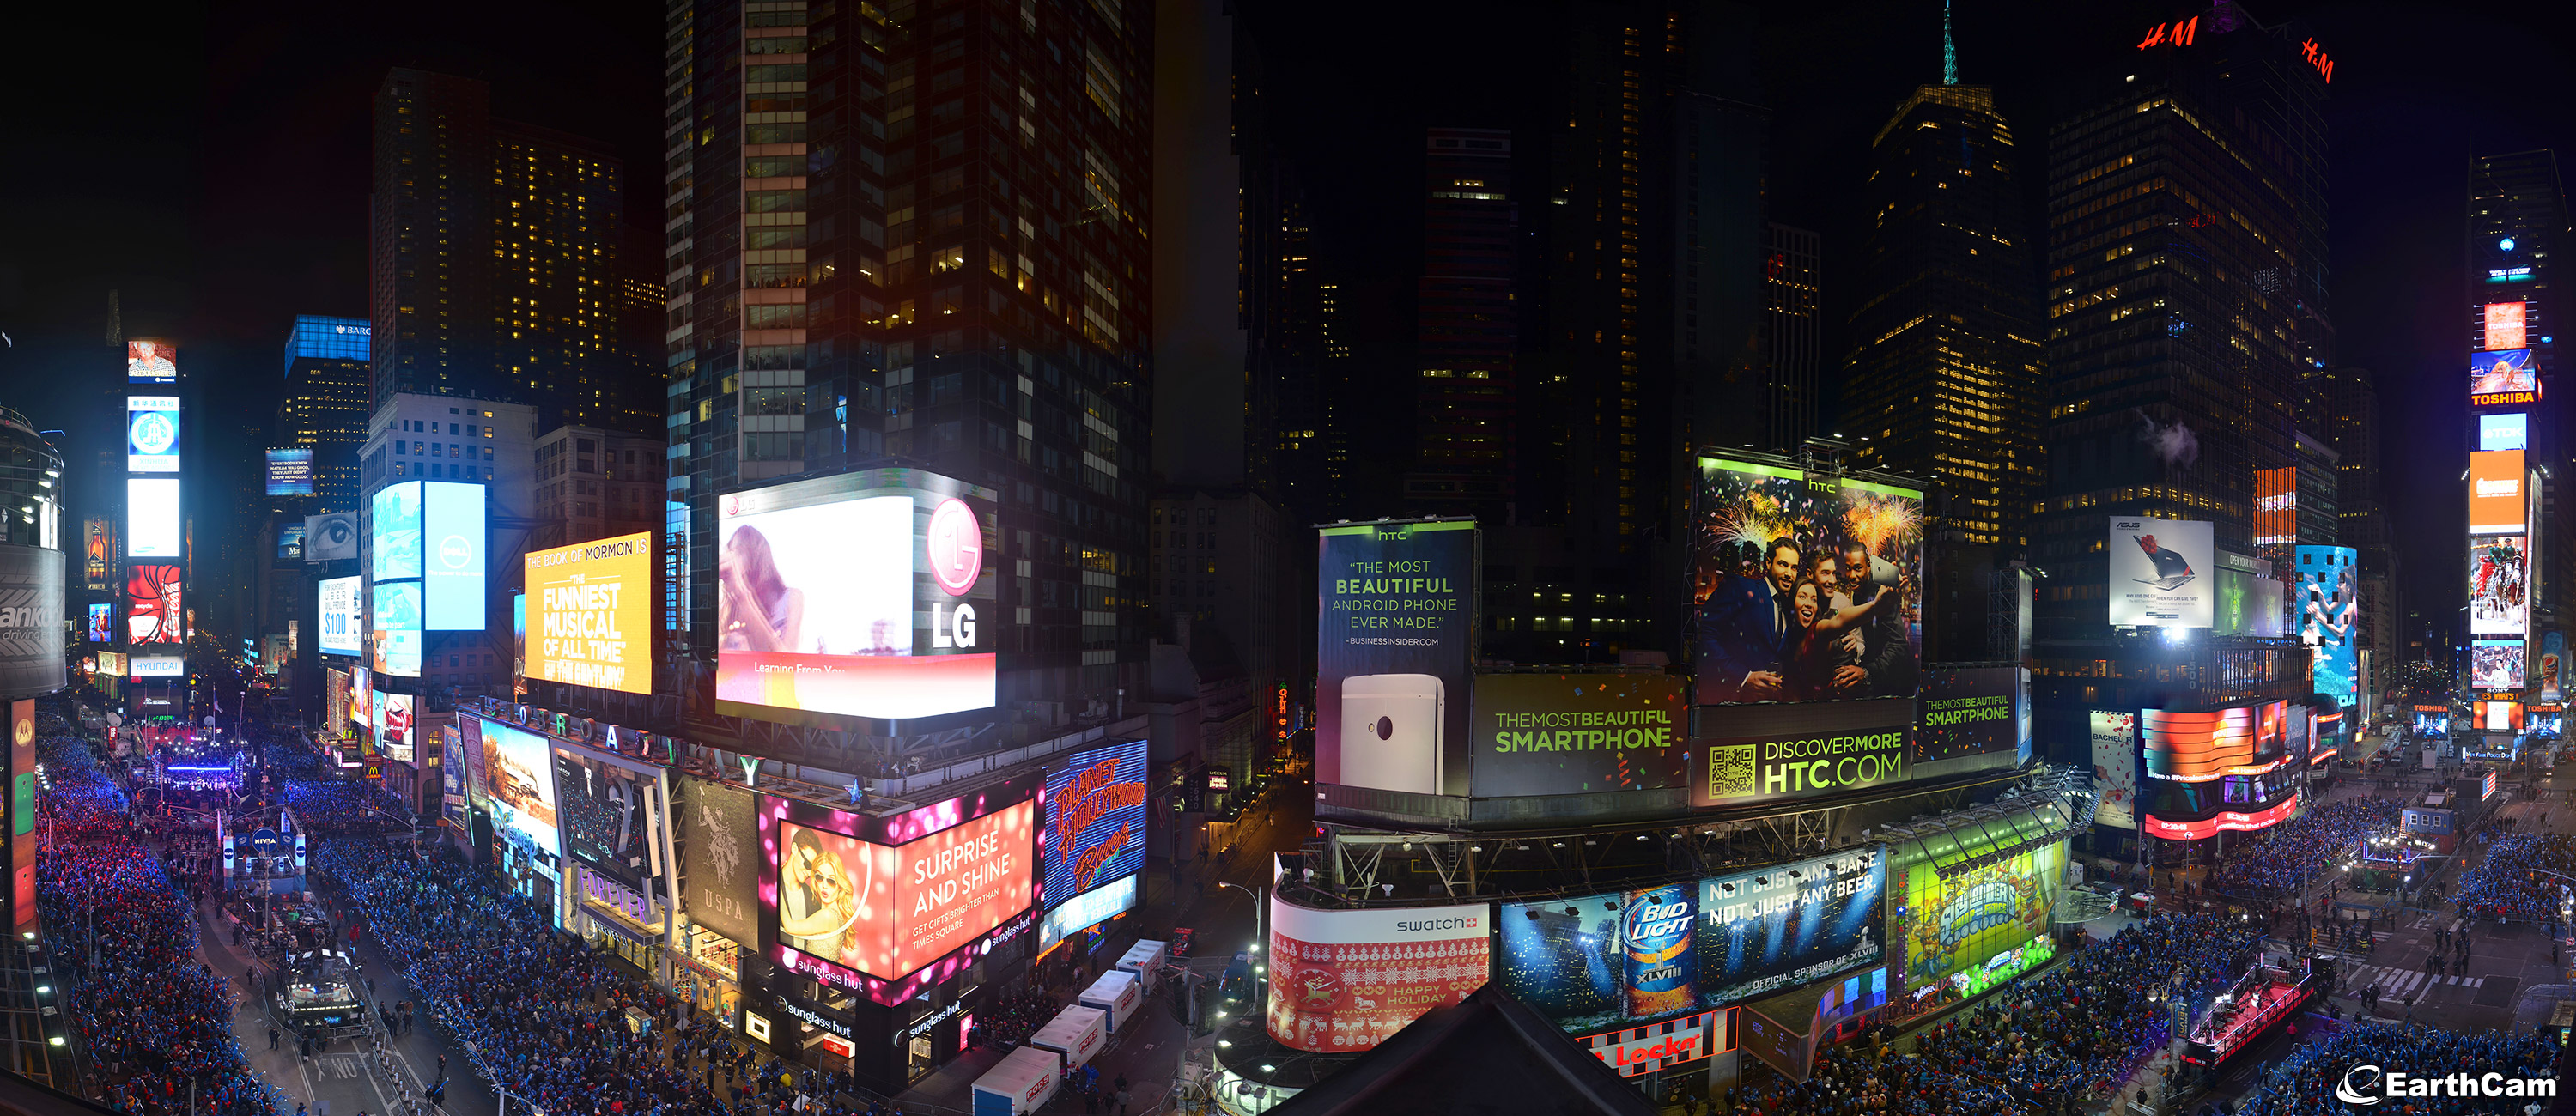 EarthCam's high definition camera took this snapshot during the 2013 New Year's Eve event in Times Square